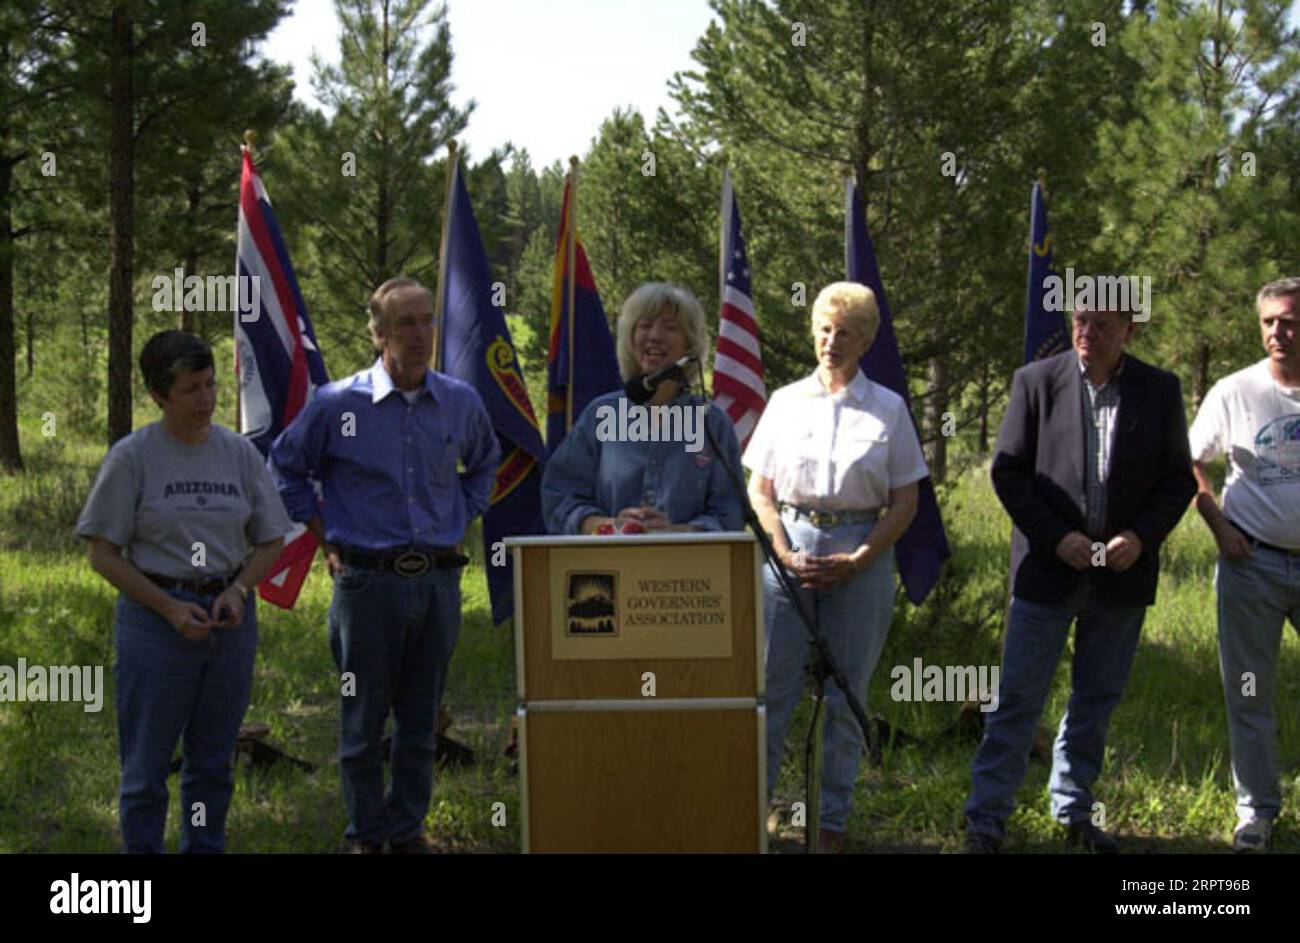 Arizona Governor Janet Napolitano, Idaho Governor Dirk Kempthorne, Secretary Gale Norton, Montana Governor Judy Martz, Wyoming Governor Dave Freudenthal, and Forest Service Chief Dale Bosworth, left to right, during the Western Governors' Association Forest Health Summit in Missoula, Montana Stock Photo